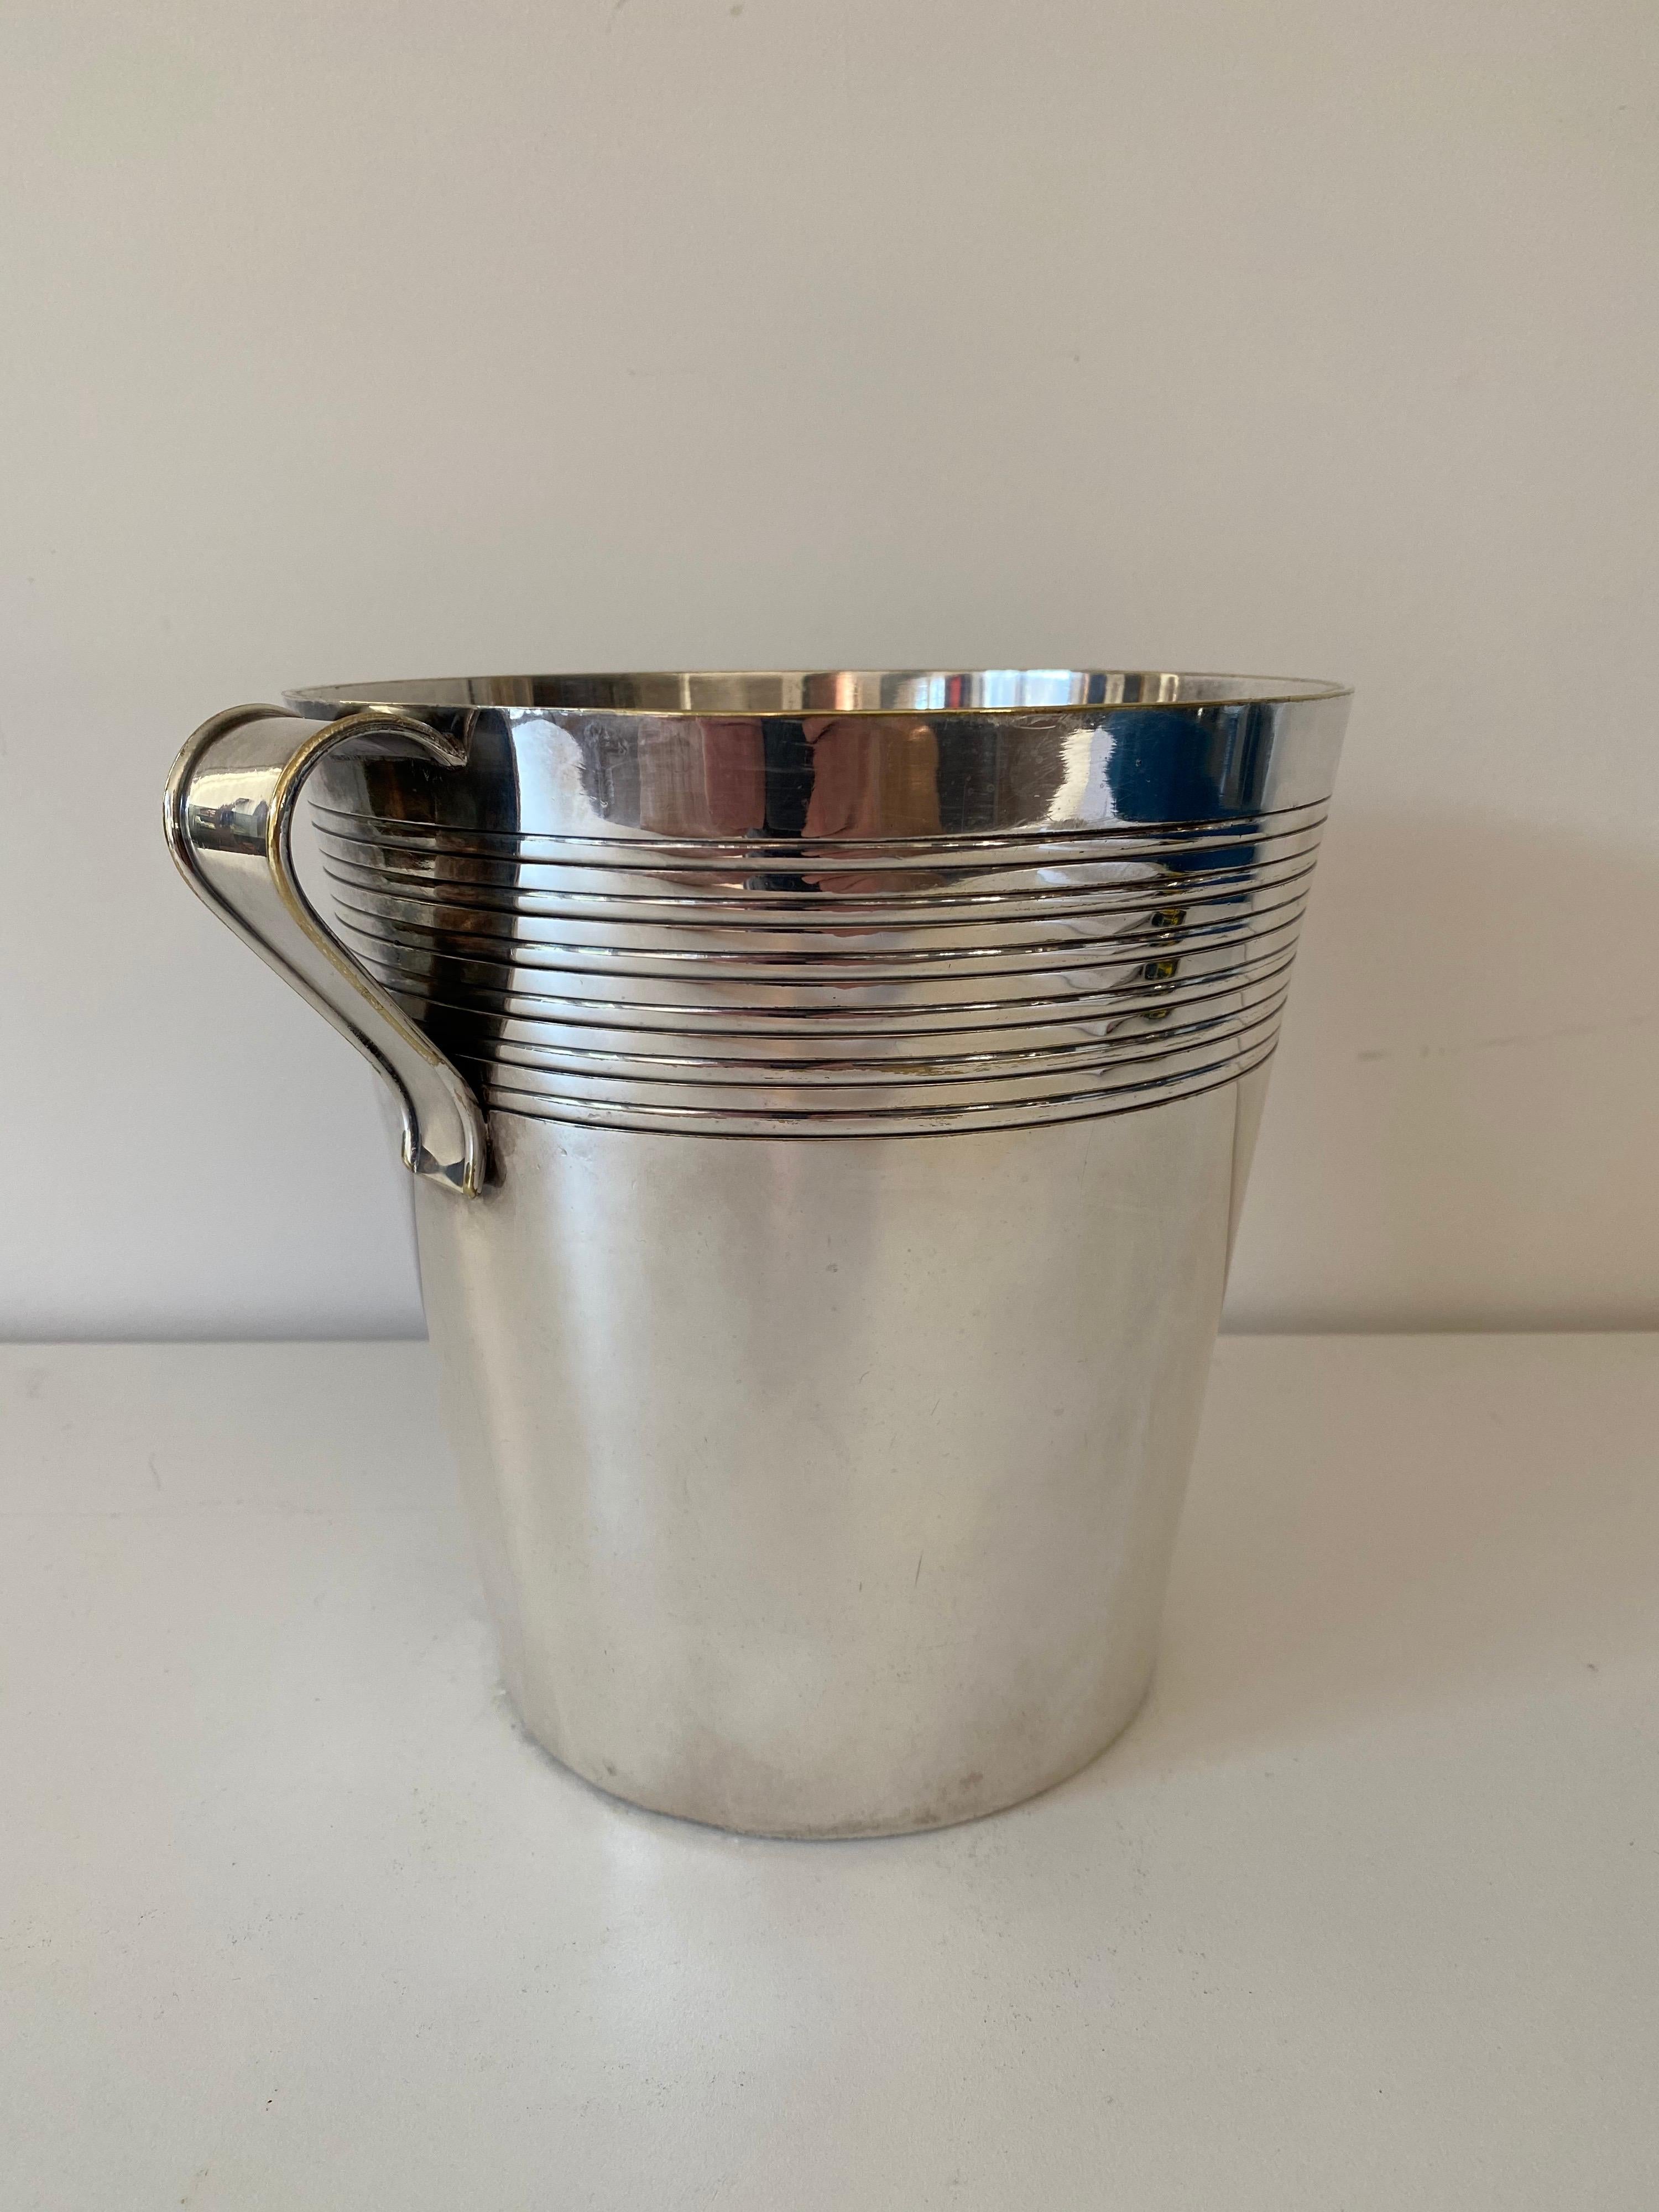 French Art Deco silver plate champagne or wine bucket by E. Potfer Paris, 1930s.